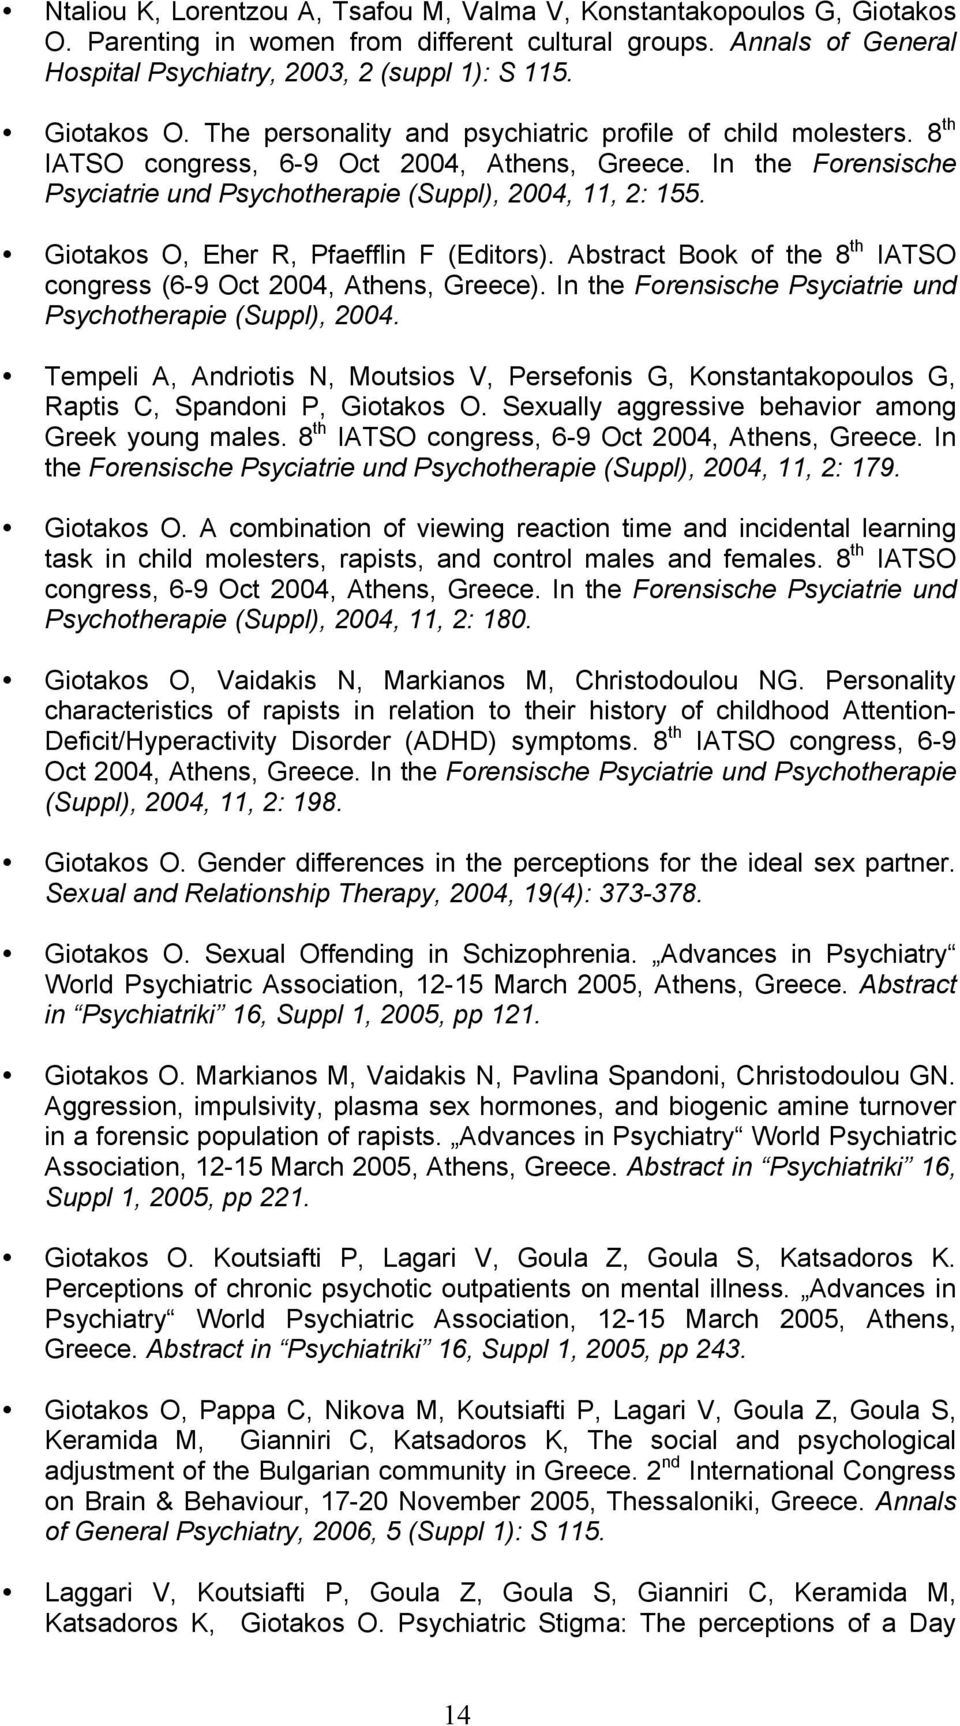 Giotakos O, Eher R, Pfaefflin F (Editors). Abstract Book of the 8 th IATSO congress (6-9 Oct 2004, Athens, Greece). In the Forensische Psyciatrie und Psychotherapie (Suppl), 2004.